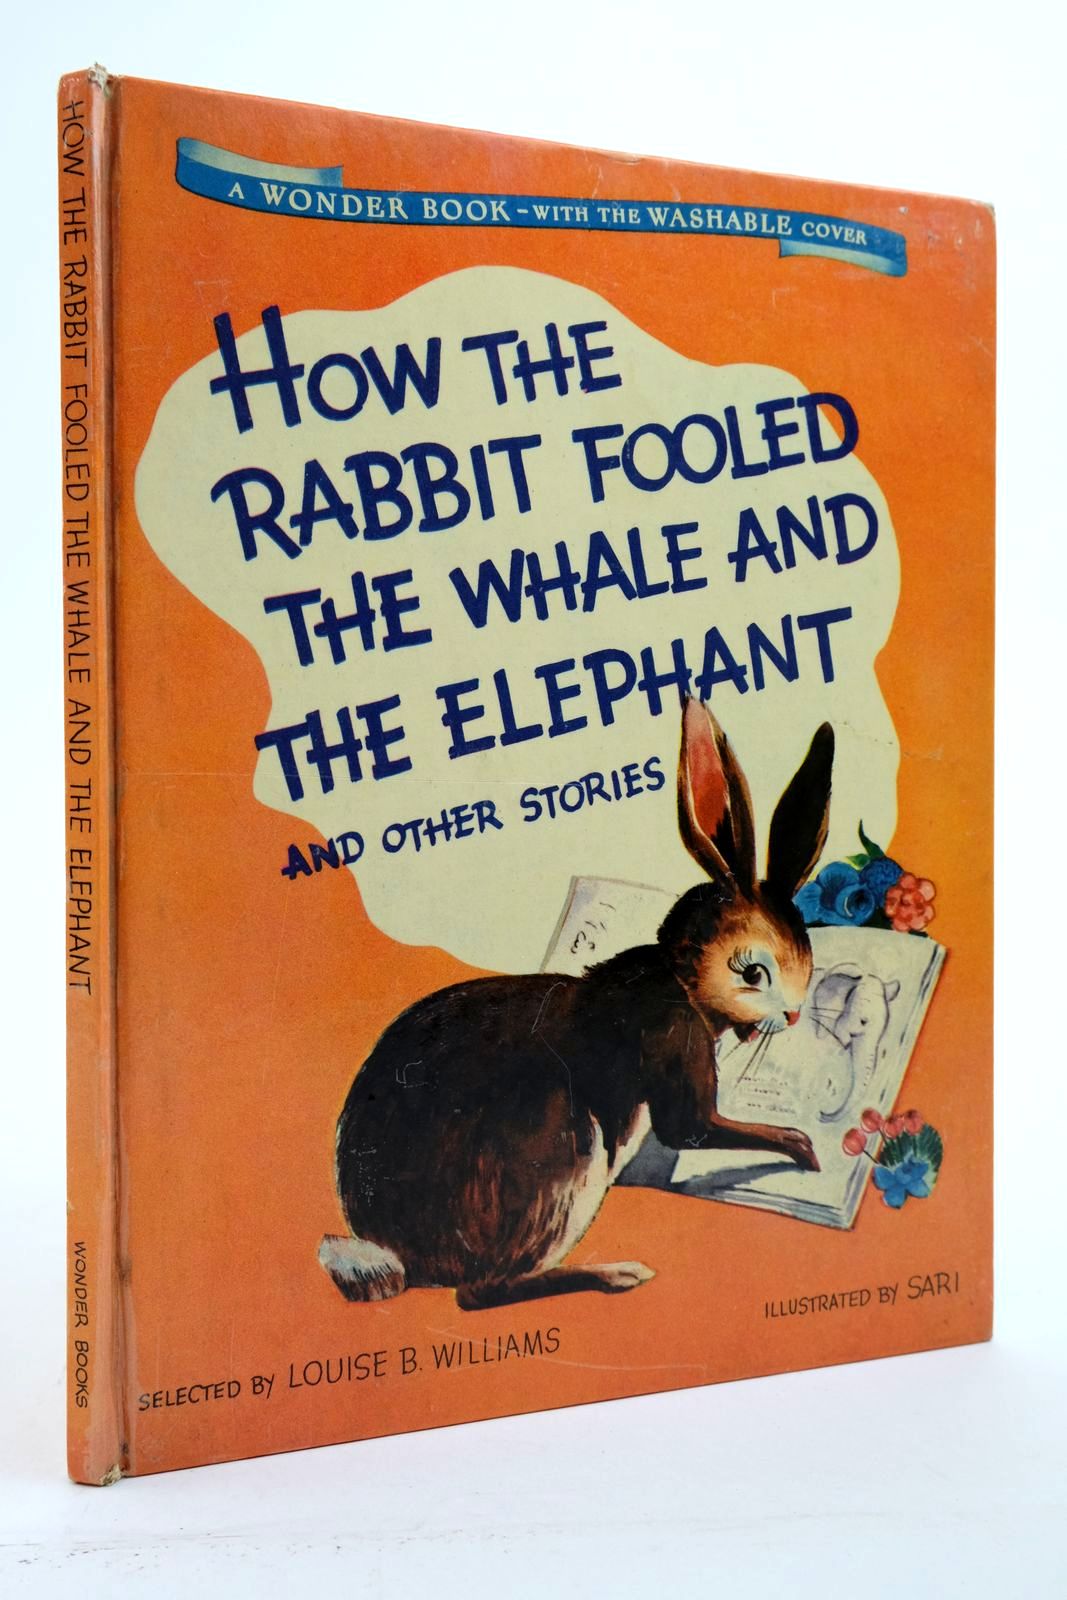 Photo of HOW THE RABBIT FOOLED THE WHALE AND THE ELEPHANT AND OTHER STORIES written by Williams, Louise B. illustrated by Sari, published by Wonder Books (STOCK CODE: 2139047)  for sale by Stella & Rose's Books